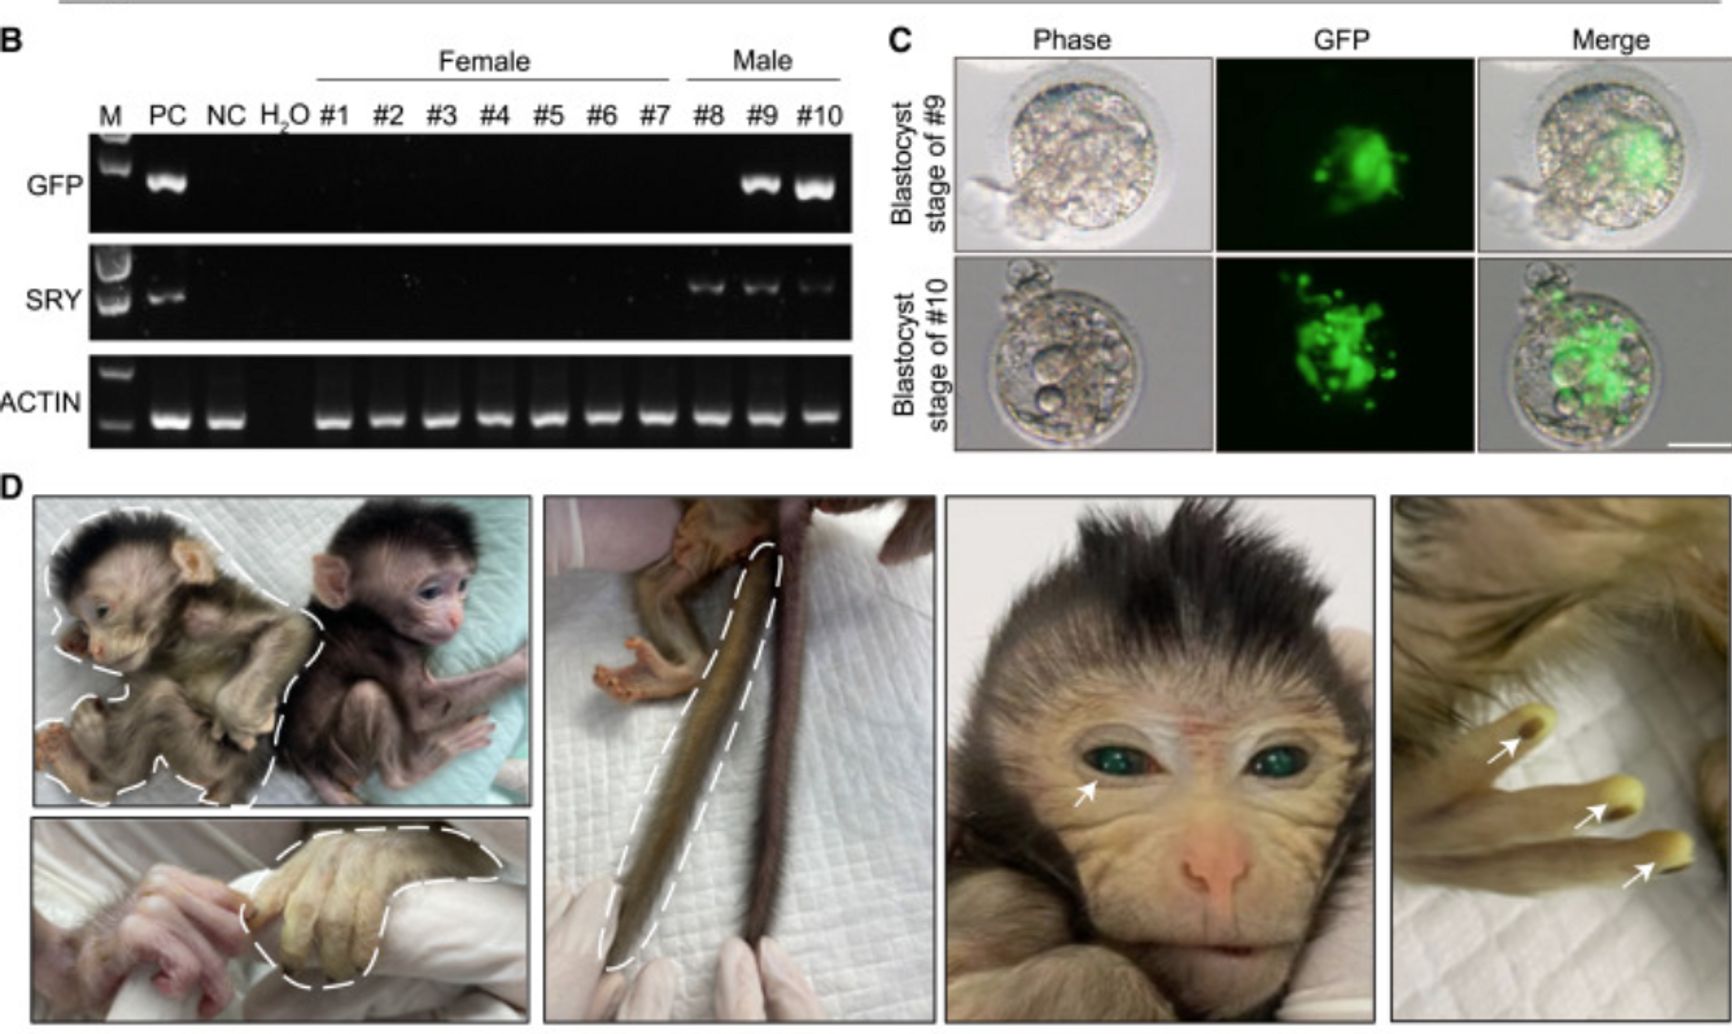 1699662739 699 In China a chimera monkey was created from two sets In China, a chimera monkey was created from two sets of DNA. Scientists hope this breakthrough will help treat ALS in humans